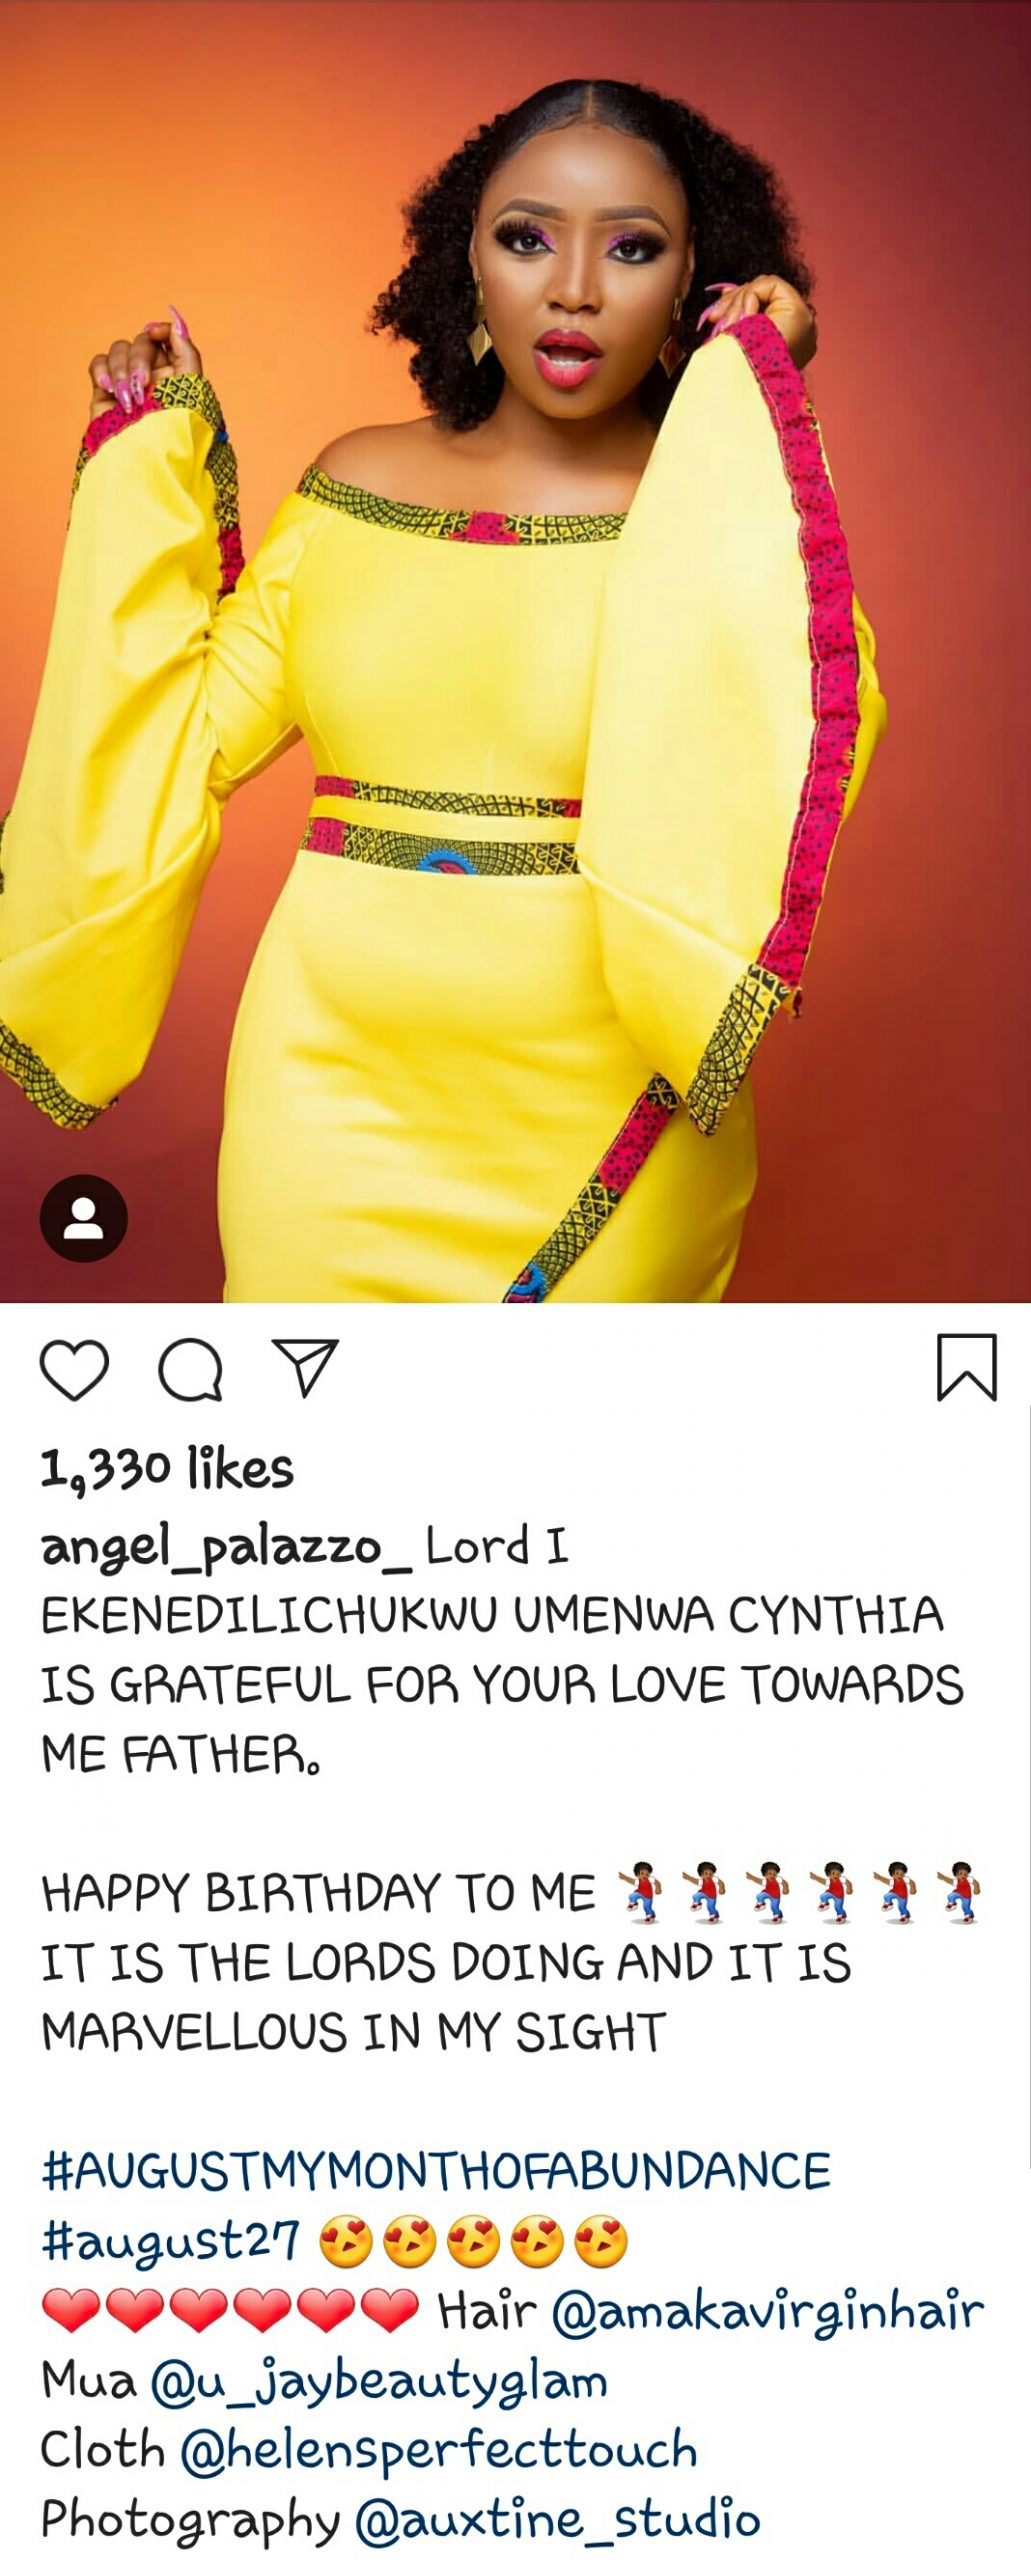 Angel Palazzo dazzles in new photos as she celebrates her birthday